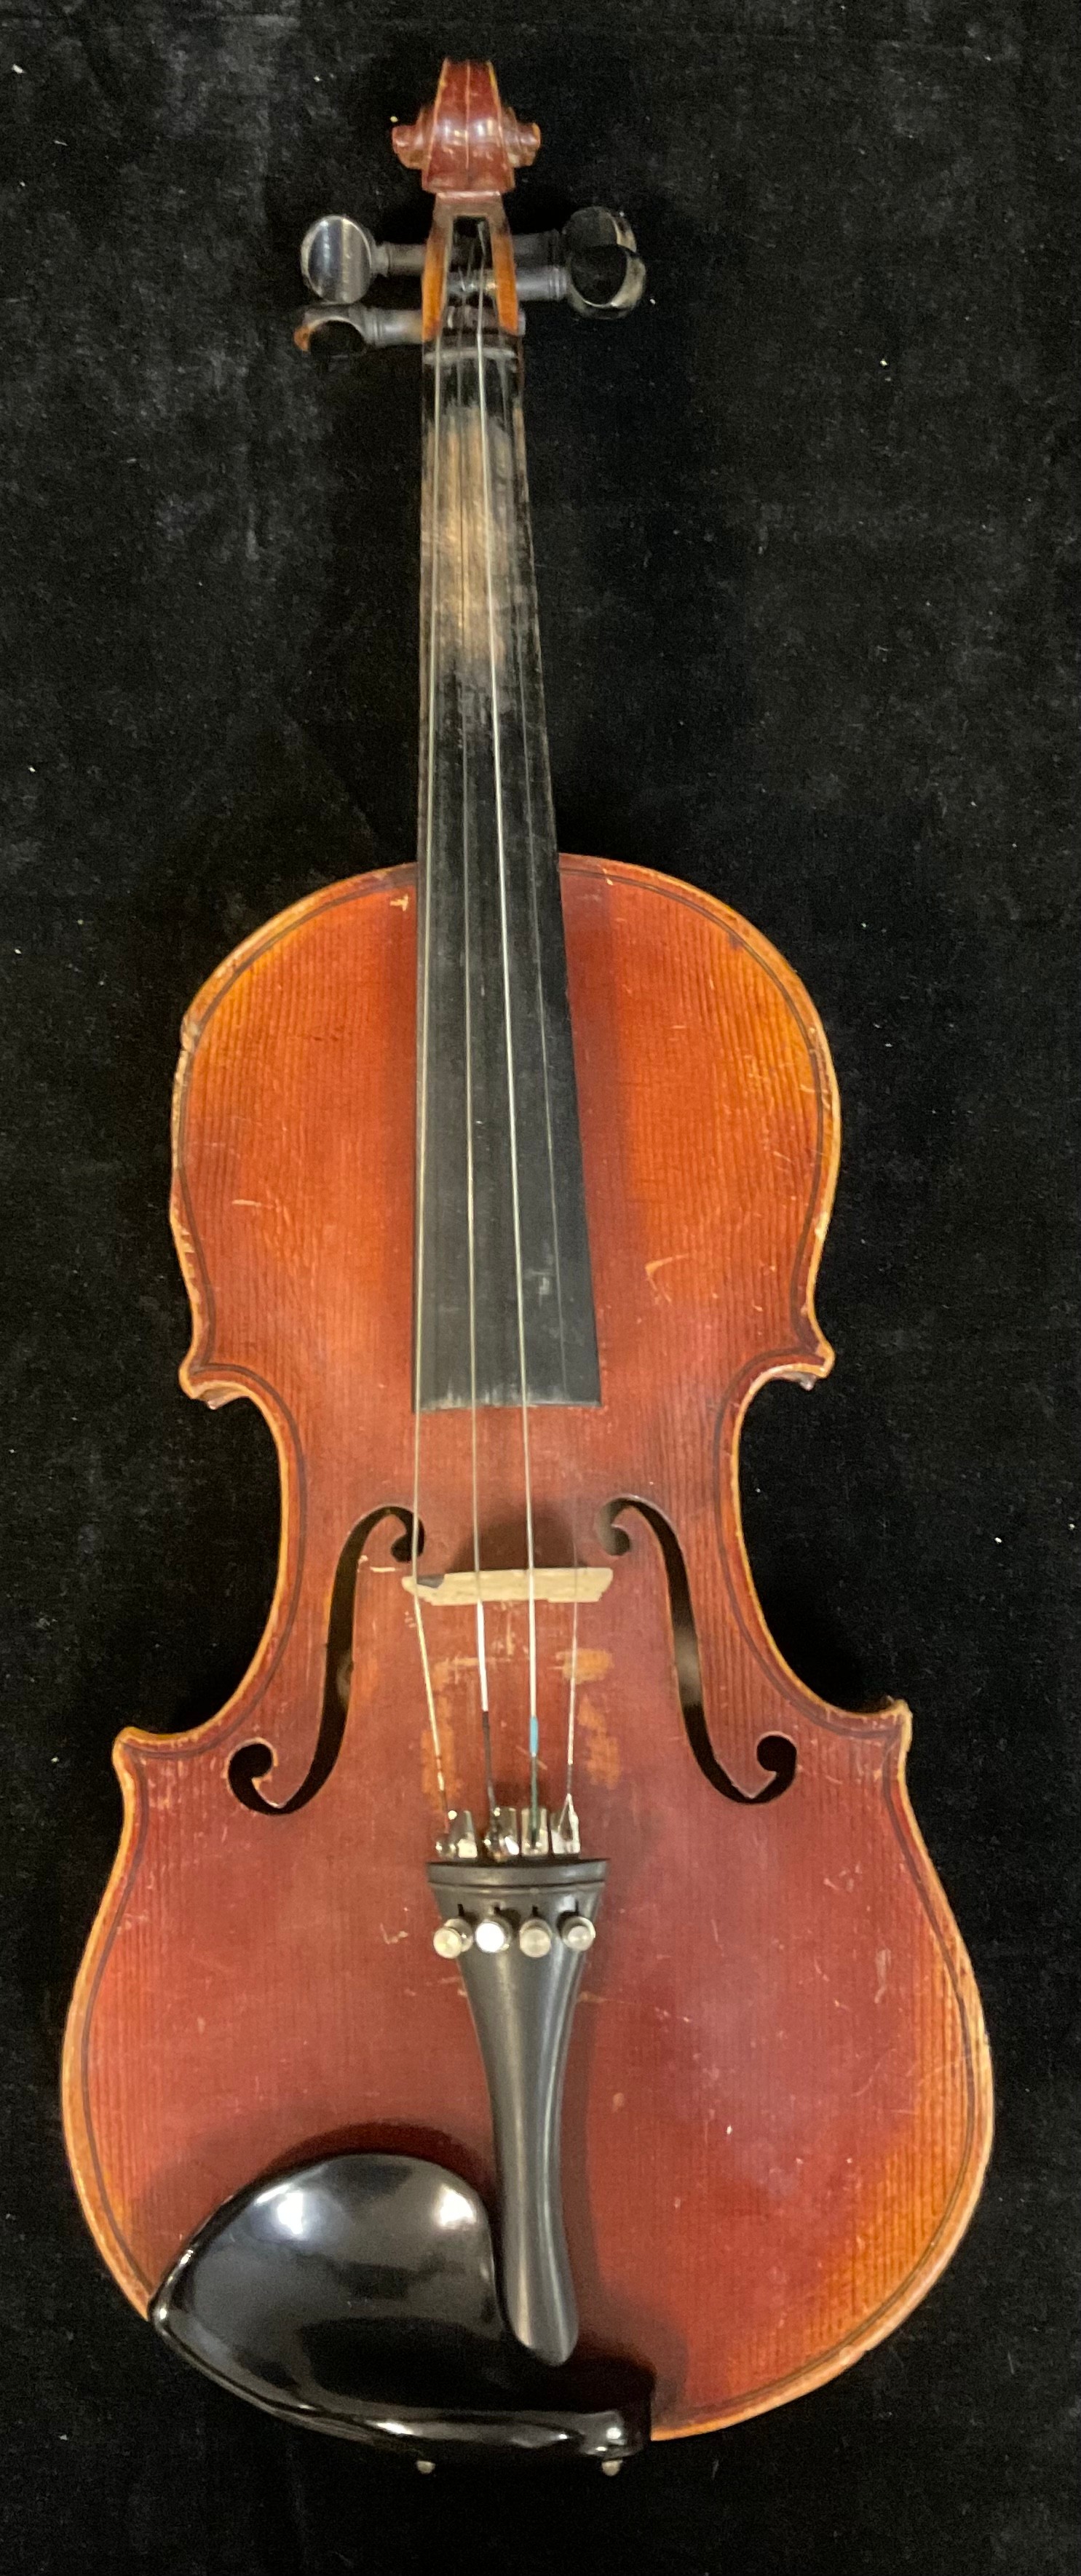 A violin, the one-piece back 33cm long excluding button